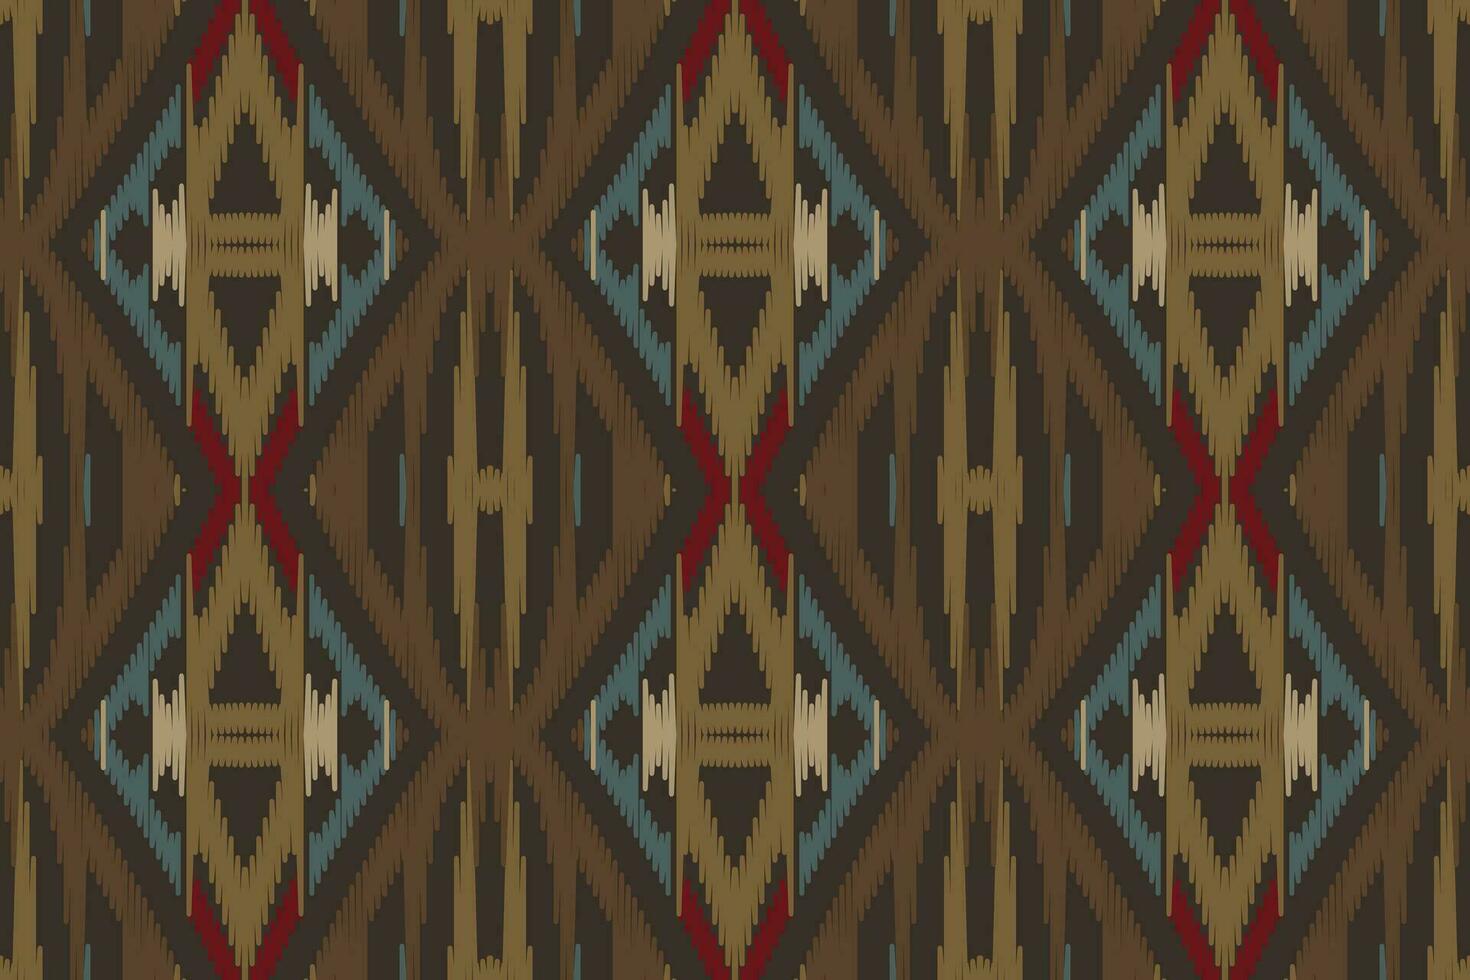 Motif Ikat Seamless Pattern Embroidery Background. Ikat Vector Geometric Ethnic Oriental Pattern traditional.aztec Style Abstract Vector design for Texture,fabric,clothing,wrapping,sarong.